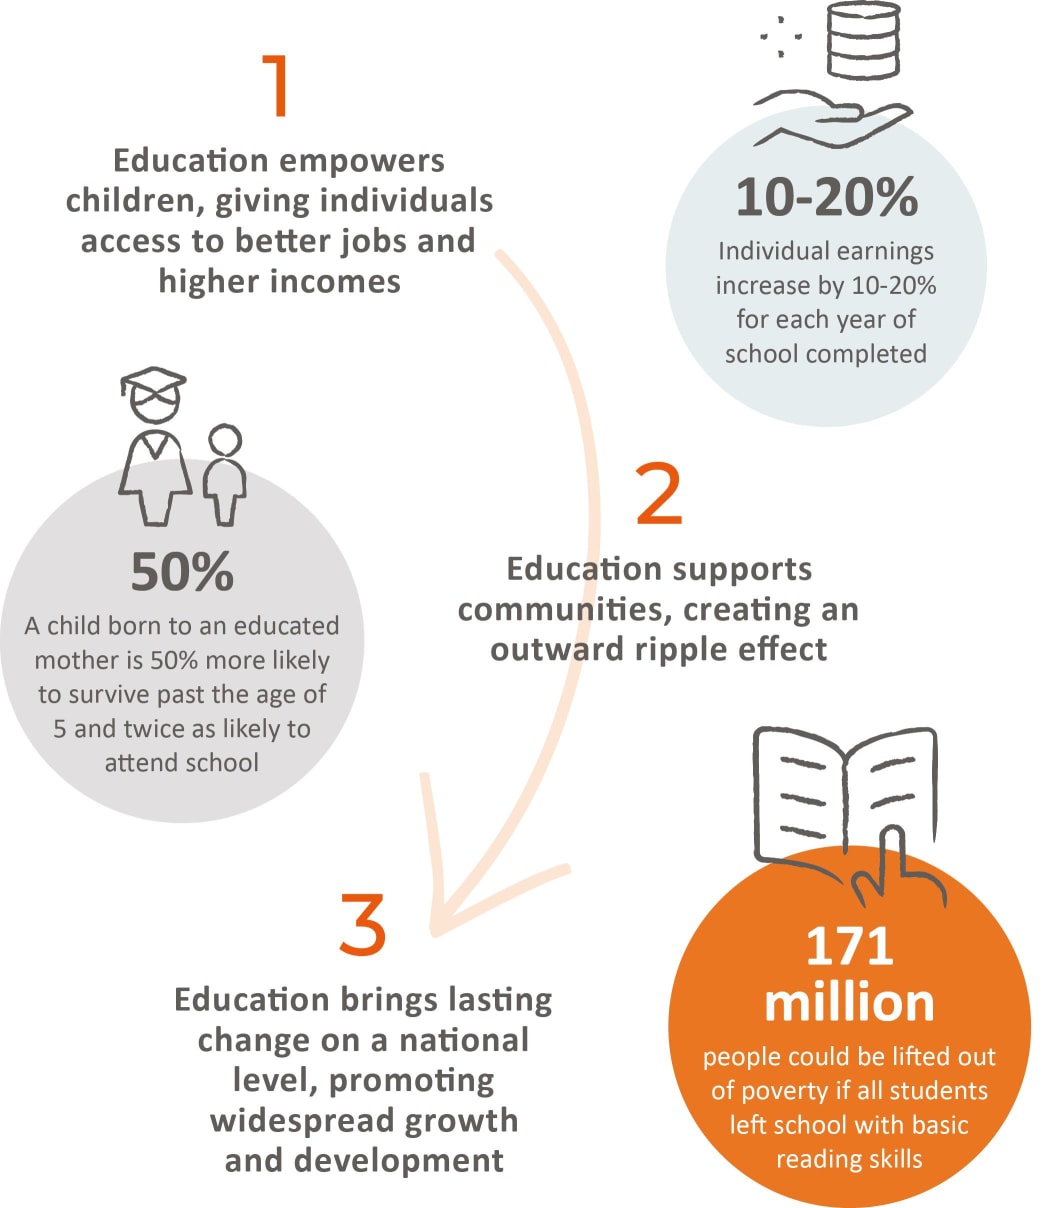 Education empowers individuals, communities and brings lasting change on a national level. 